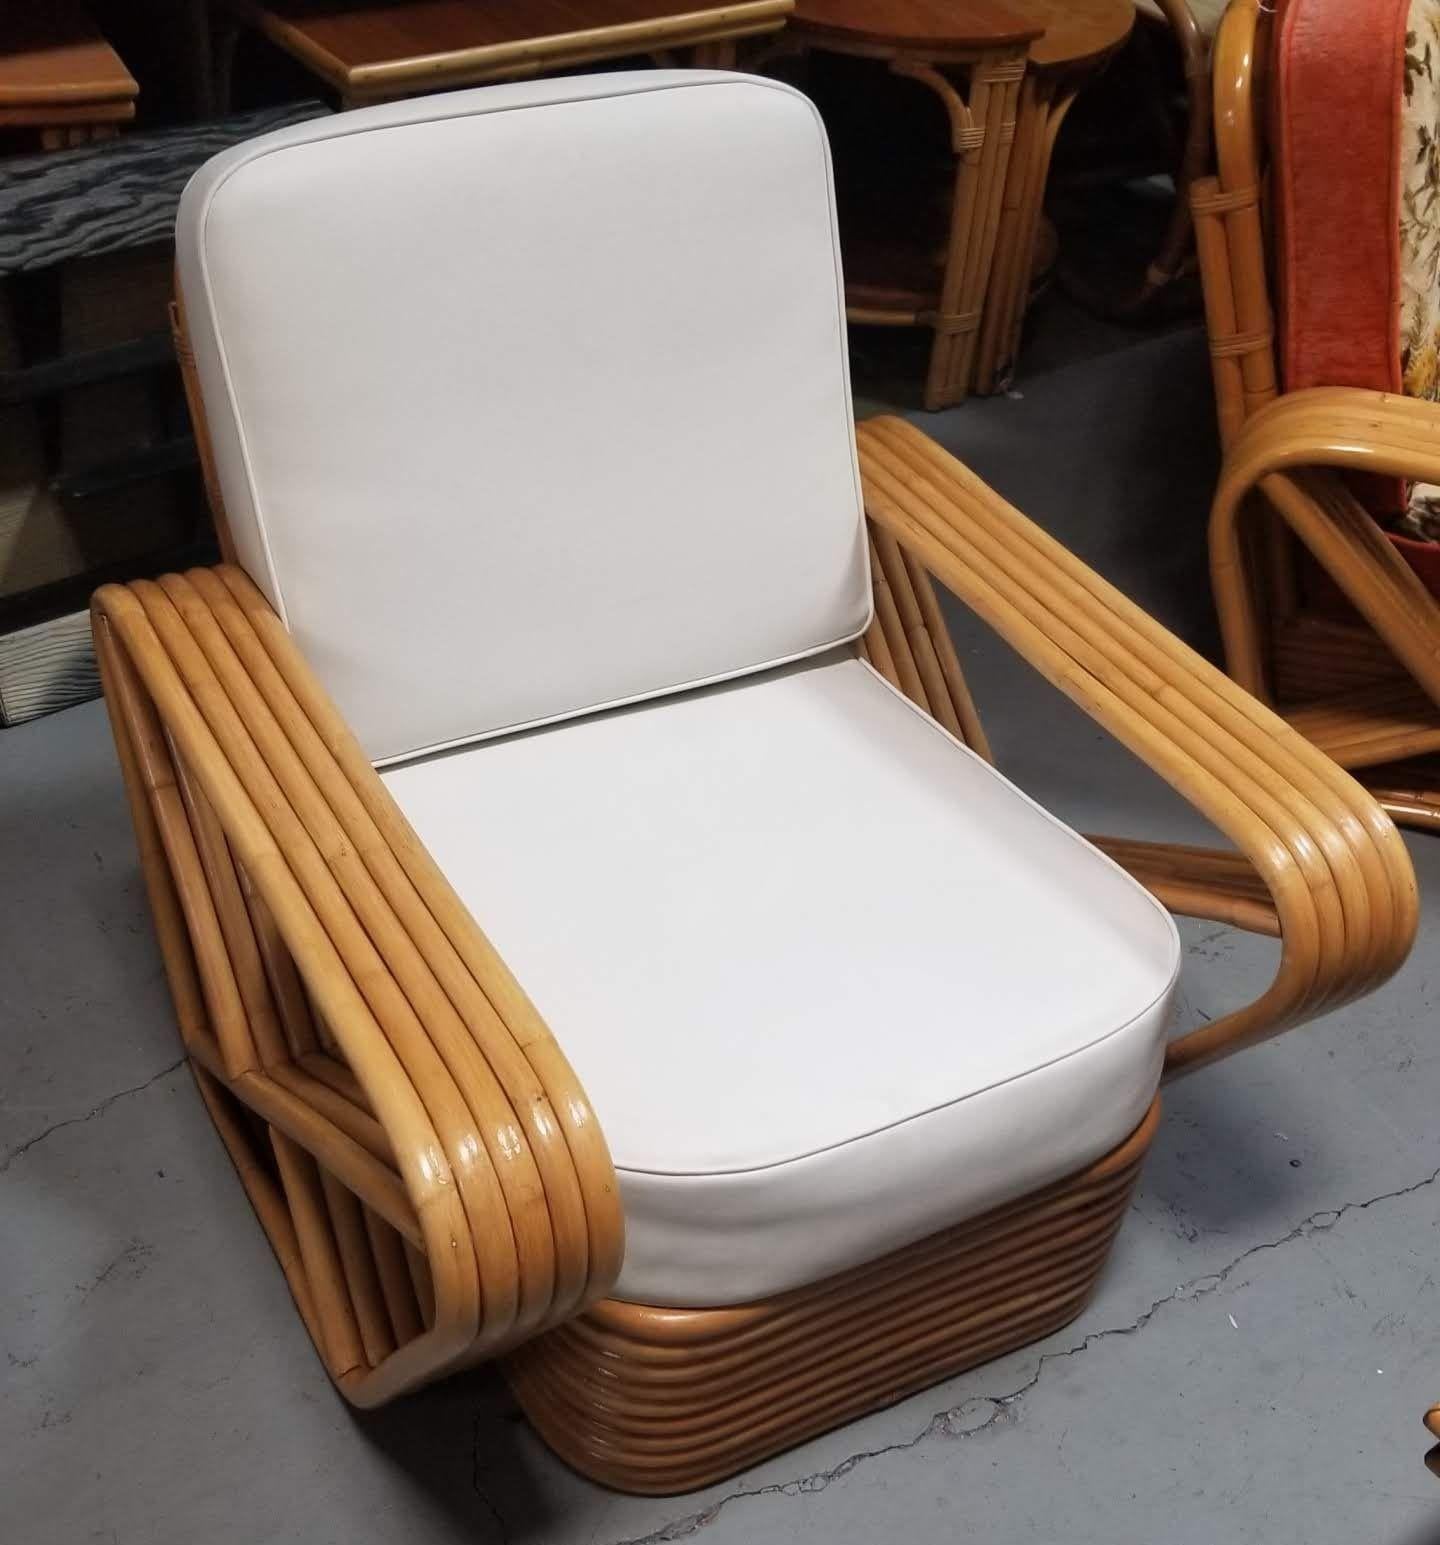 Restored Rattan Five Strand Square Pretzel Sofa and Lounge Chair Set In Excellent Condition For Sale In Van Nuys, CA